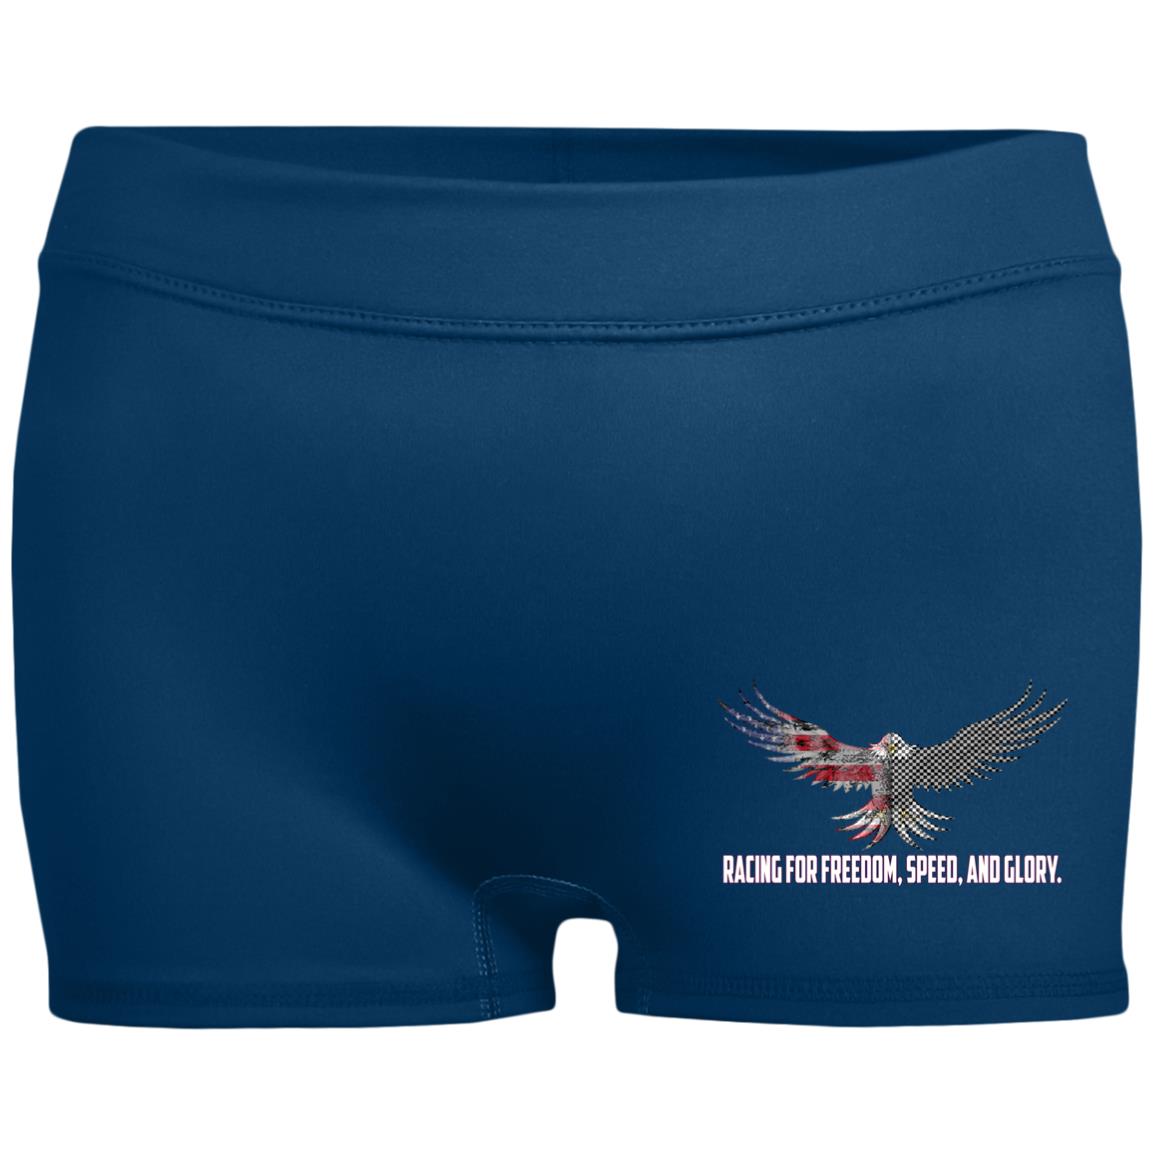 Racing For Freedom, Speed, And Glory Ladies' Fitted Moisture-Wicking 2.5 inch Inseam Shorts